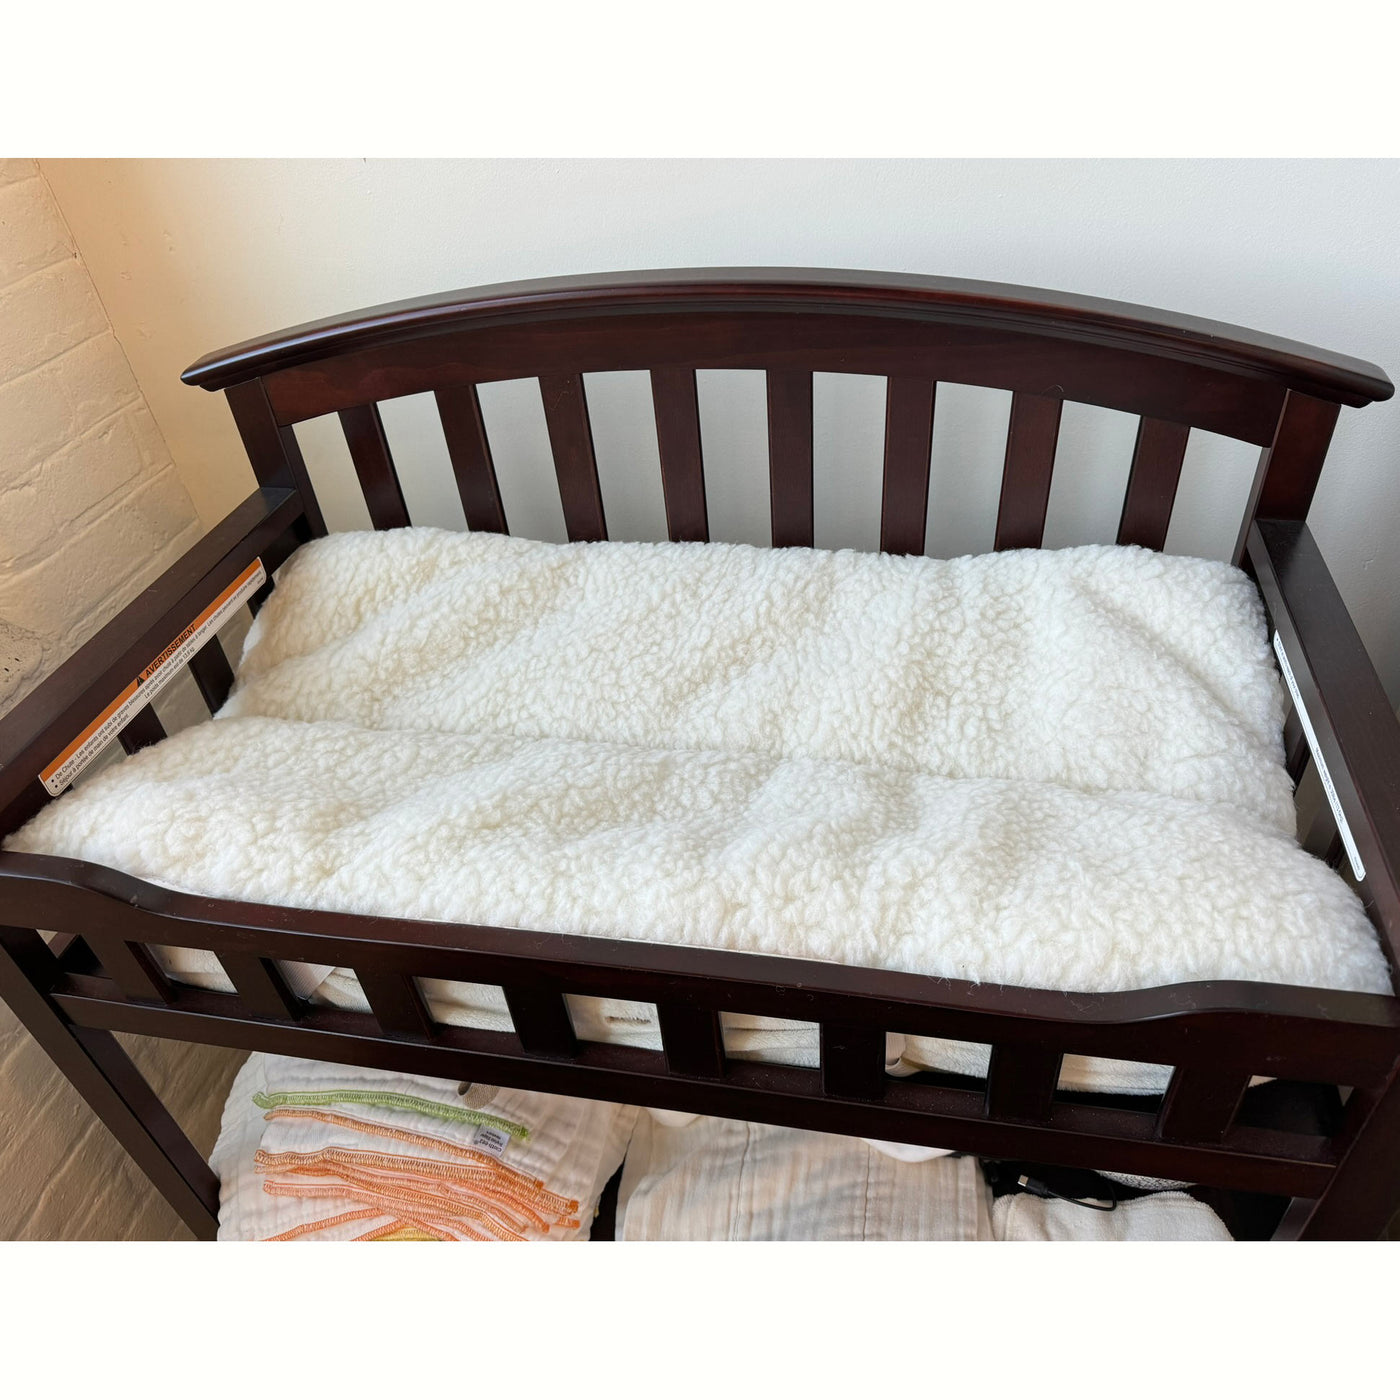 wool topper on changing table